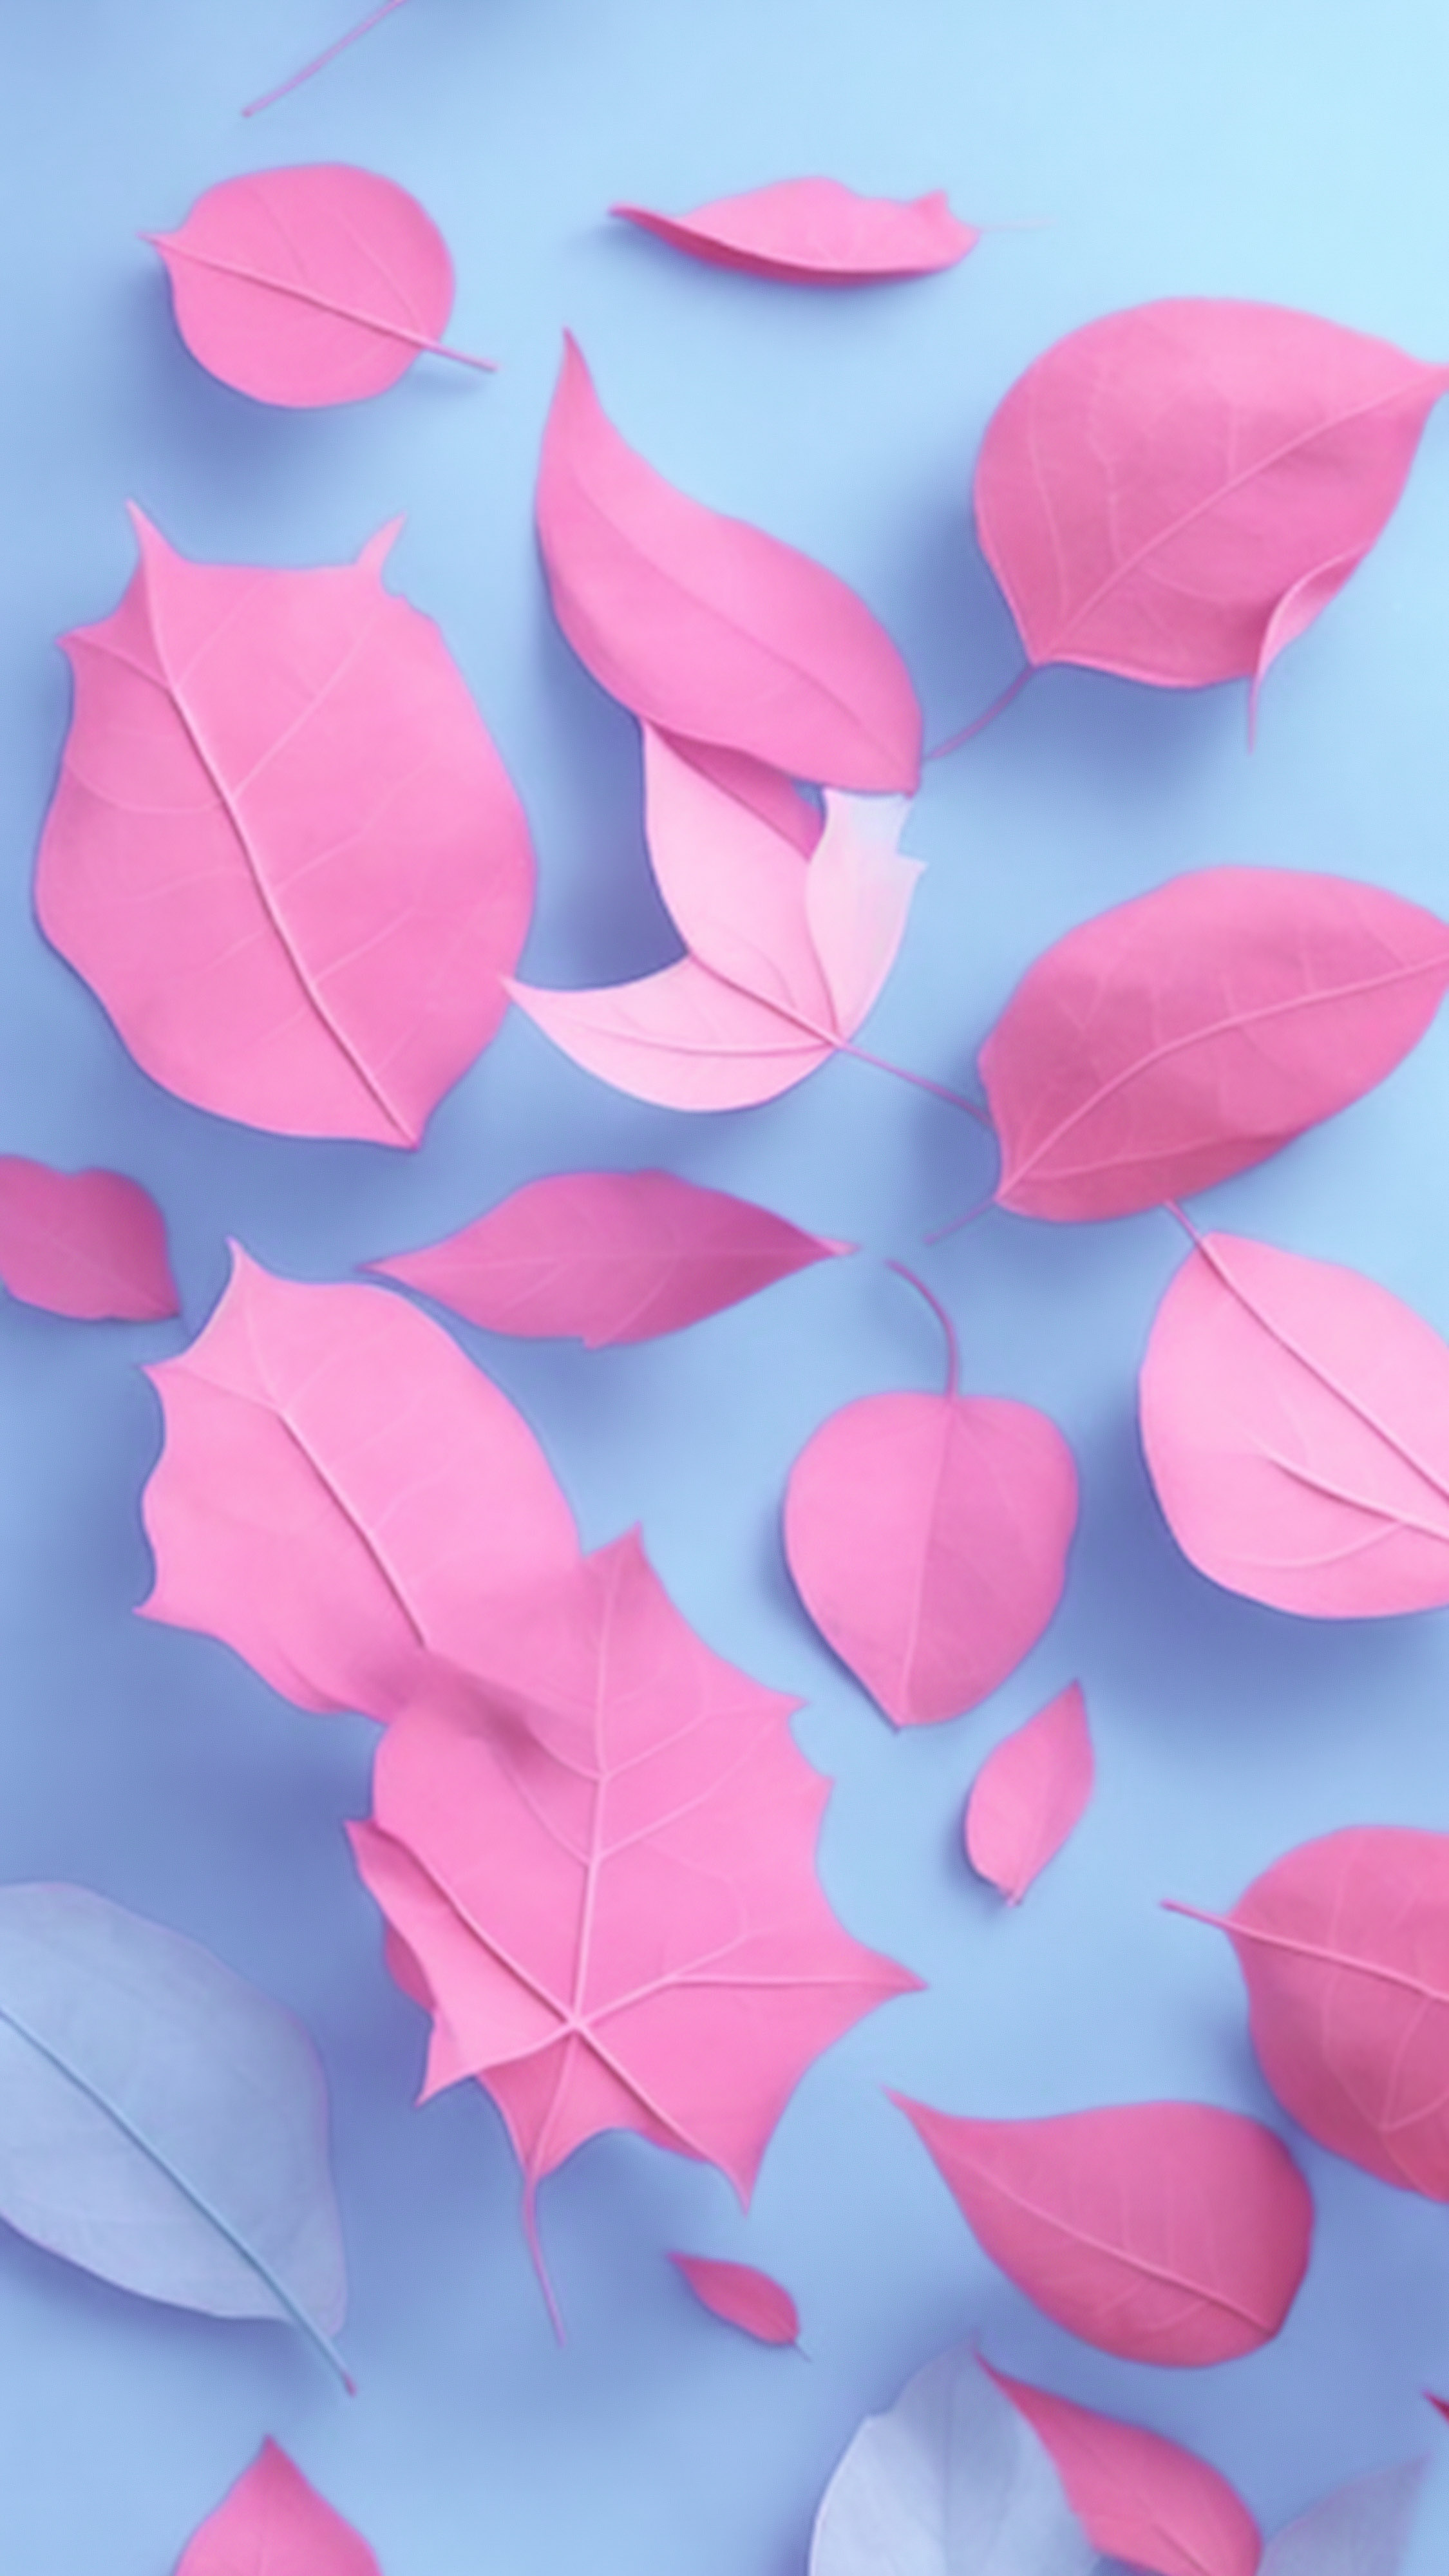 Transform your device’s appearance with our cute home screen for iPhone, featuring various shapes and sizes of pink leaves scattered against a soft blue background.